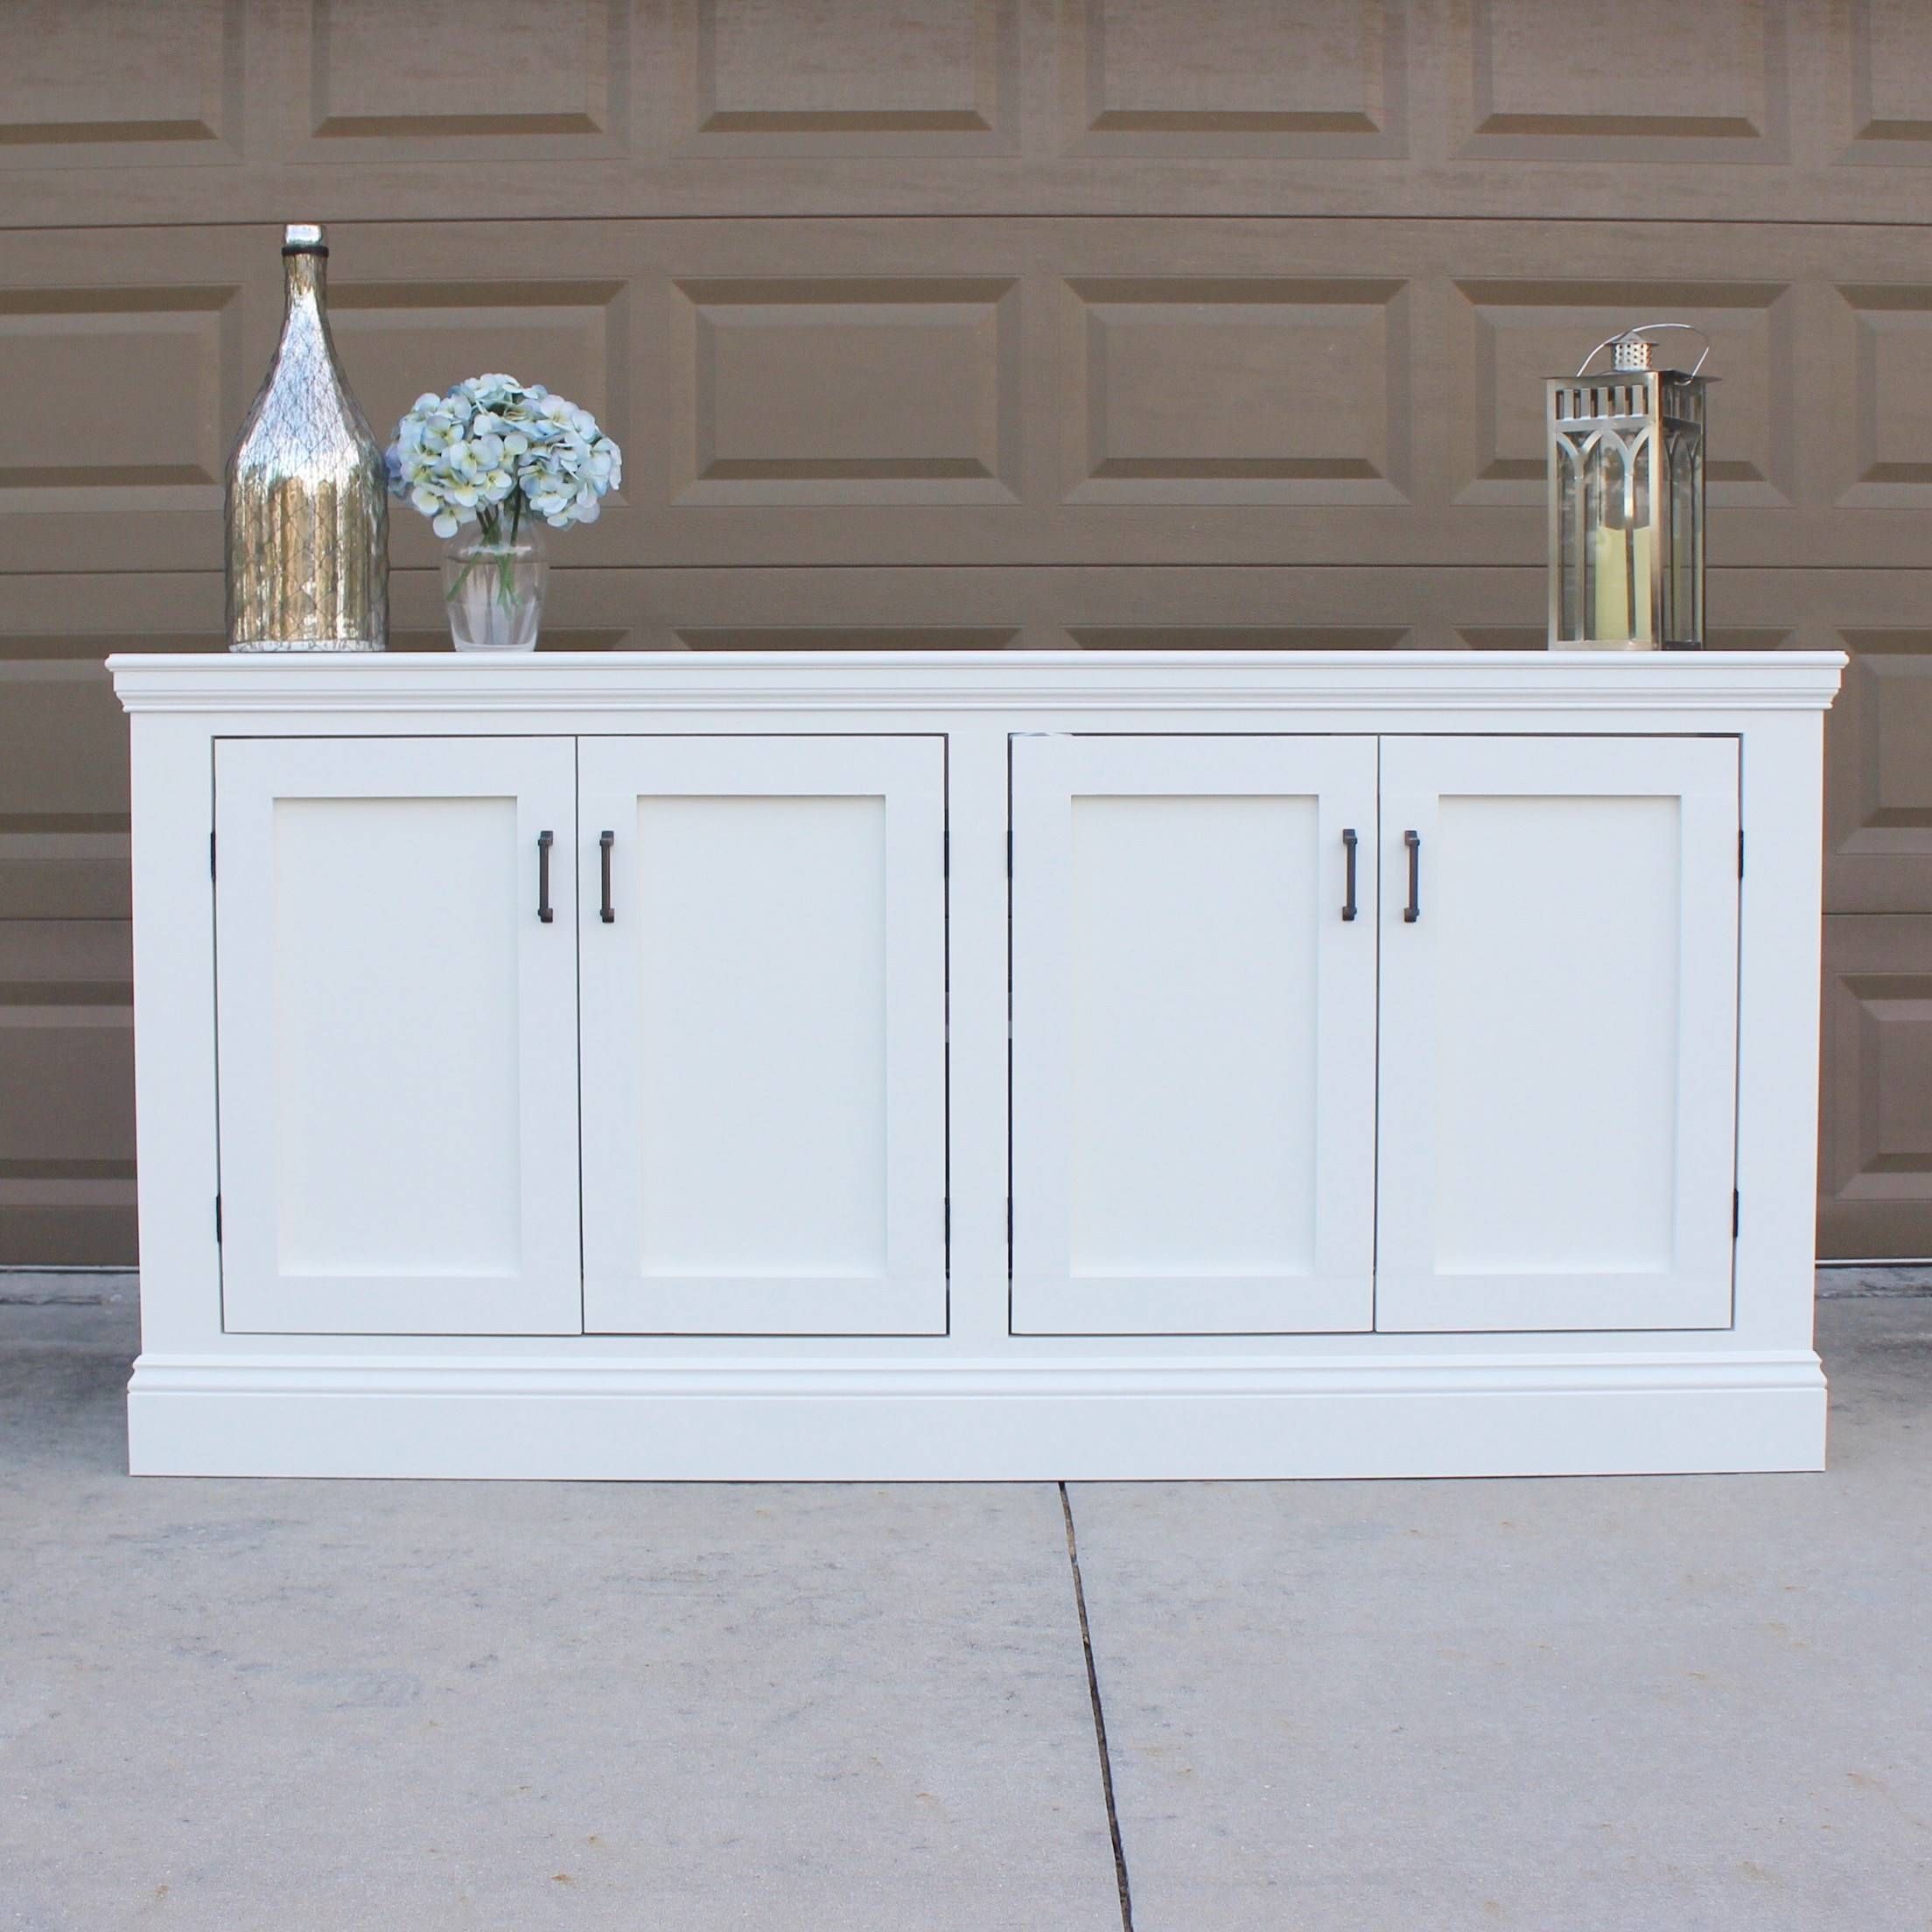 Beautiful Restoration Hardware Sideboard – Bjdgjy For Diy Sideboards (View 15 of 15)